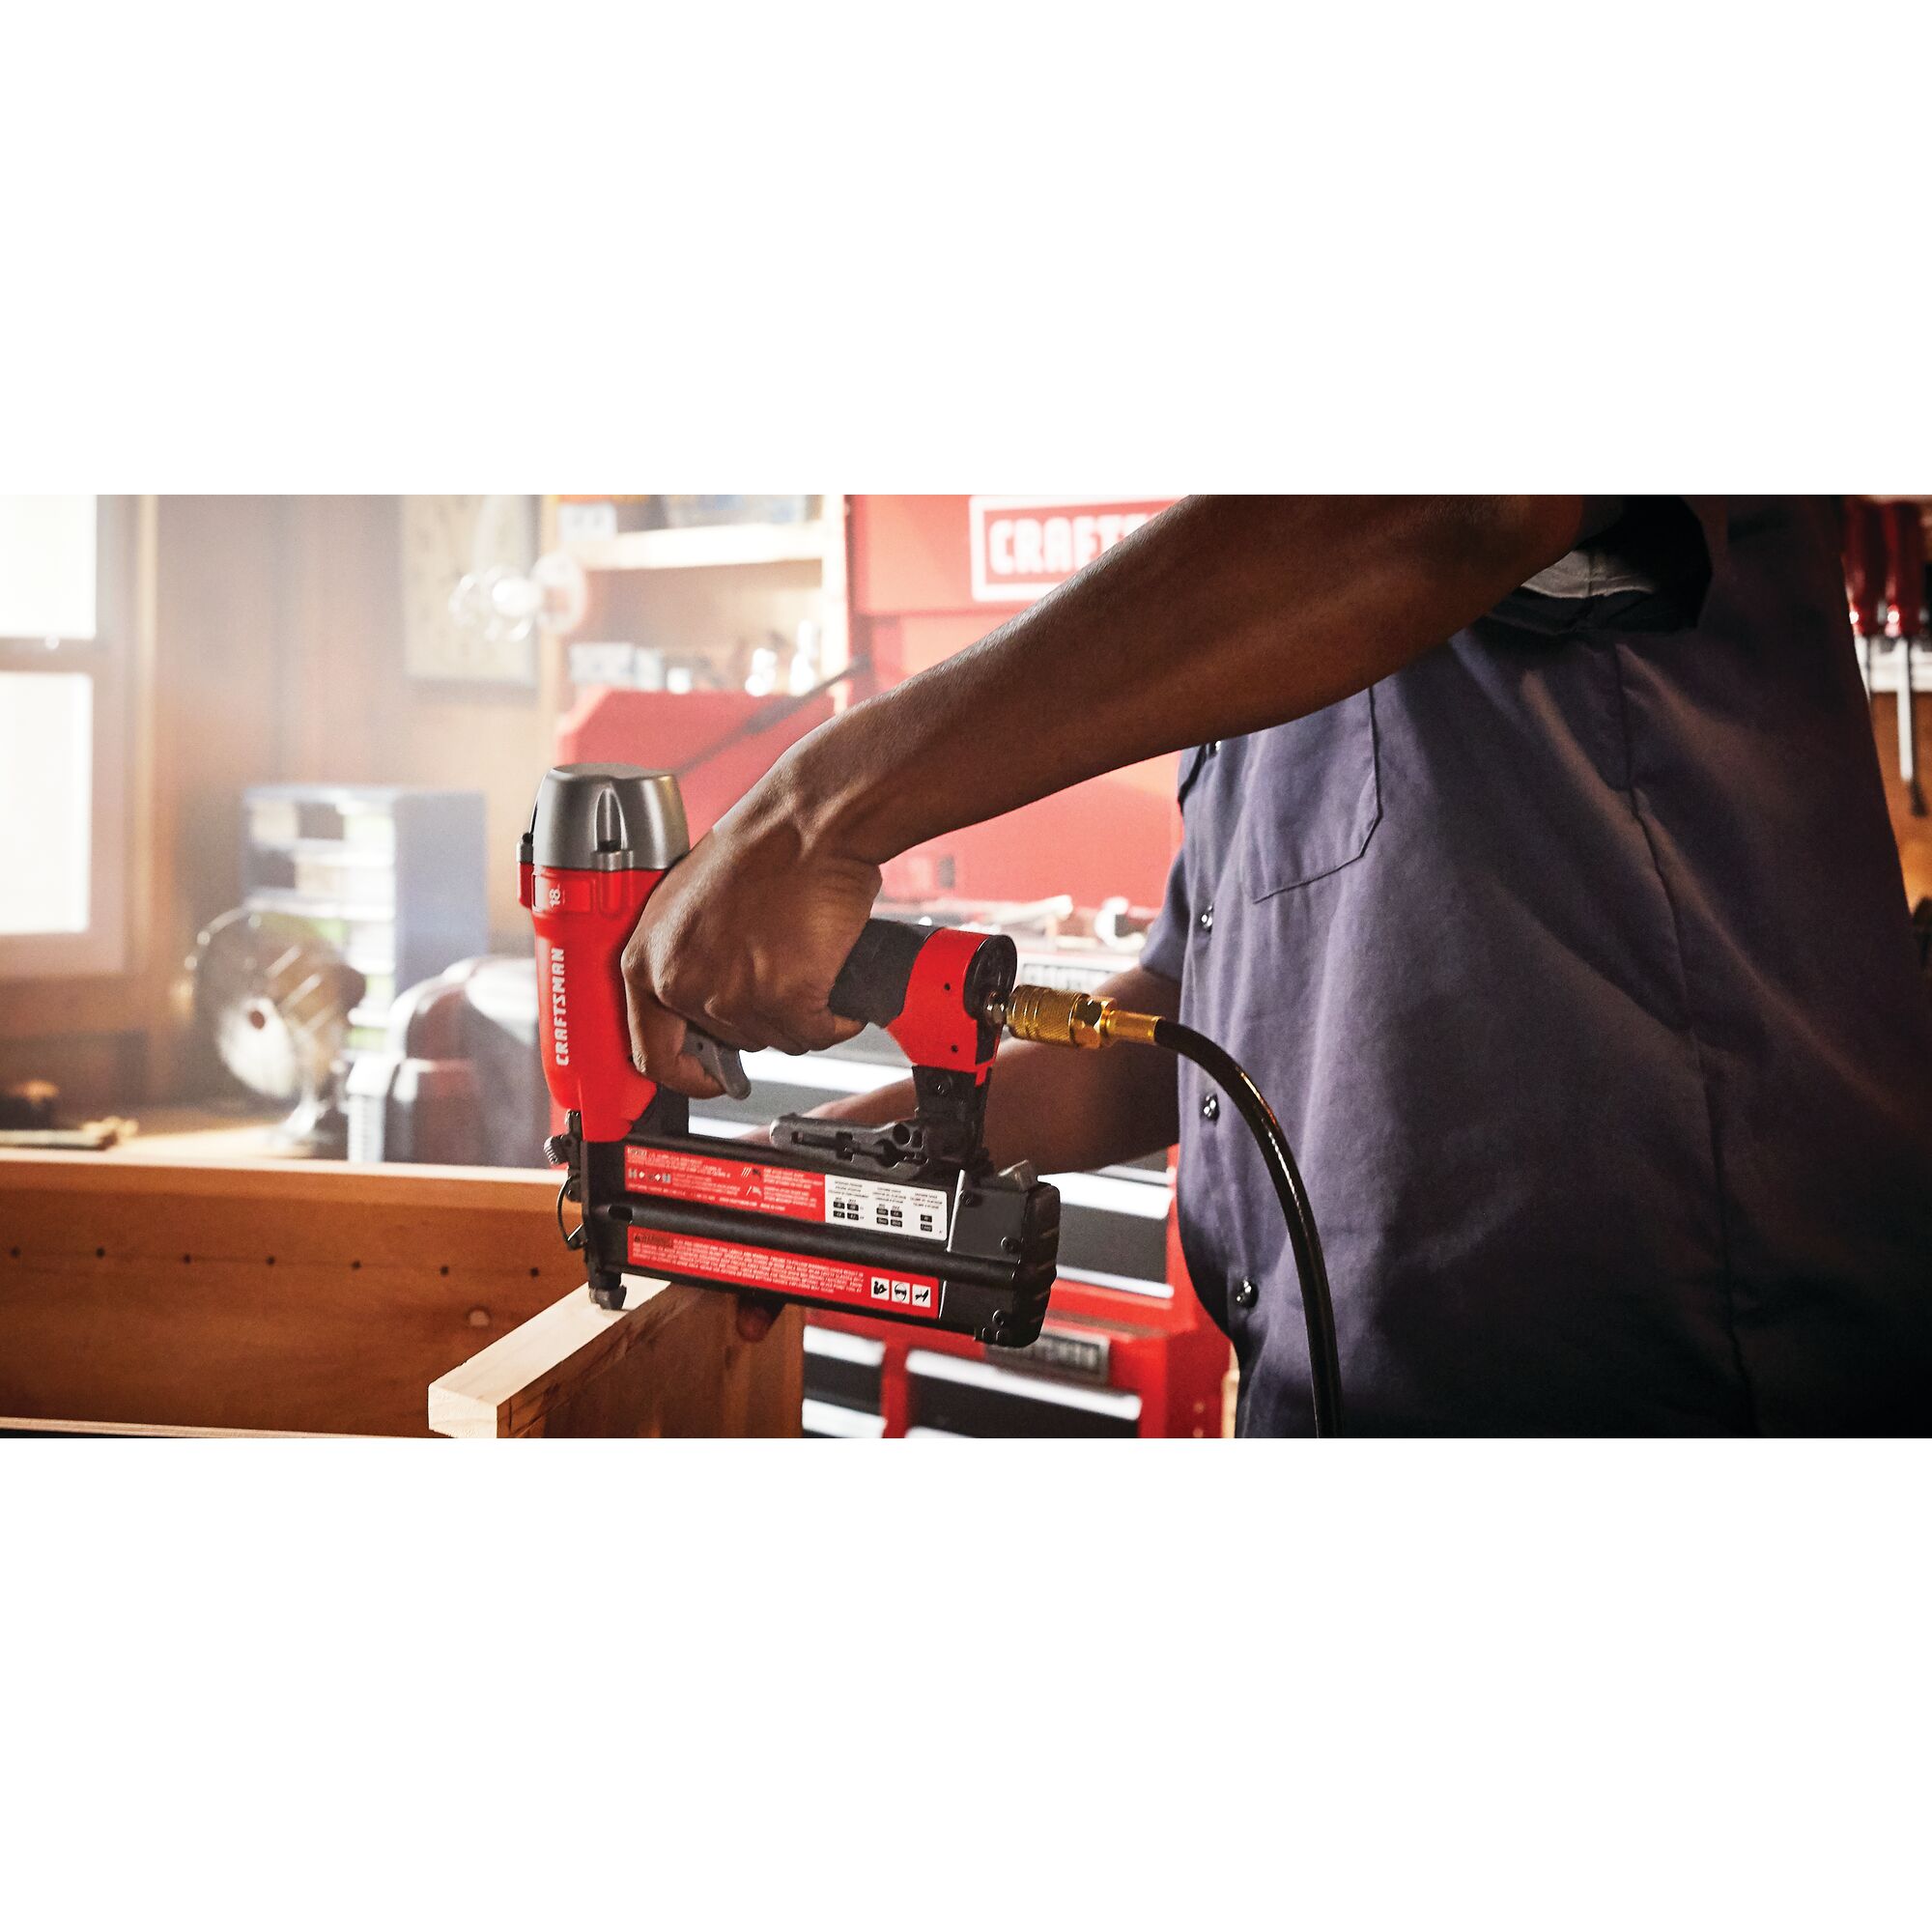 18 gauge brad nailer being used to nail a wooden strip by a person.